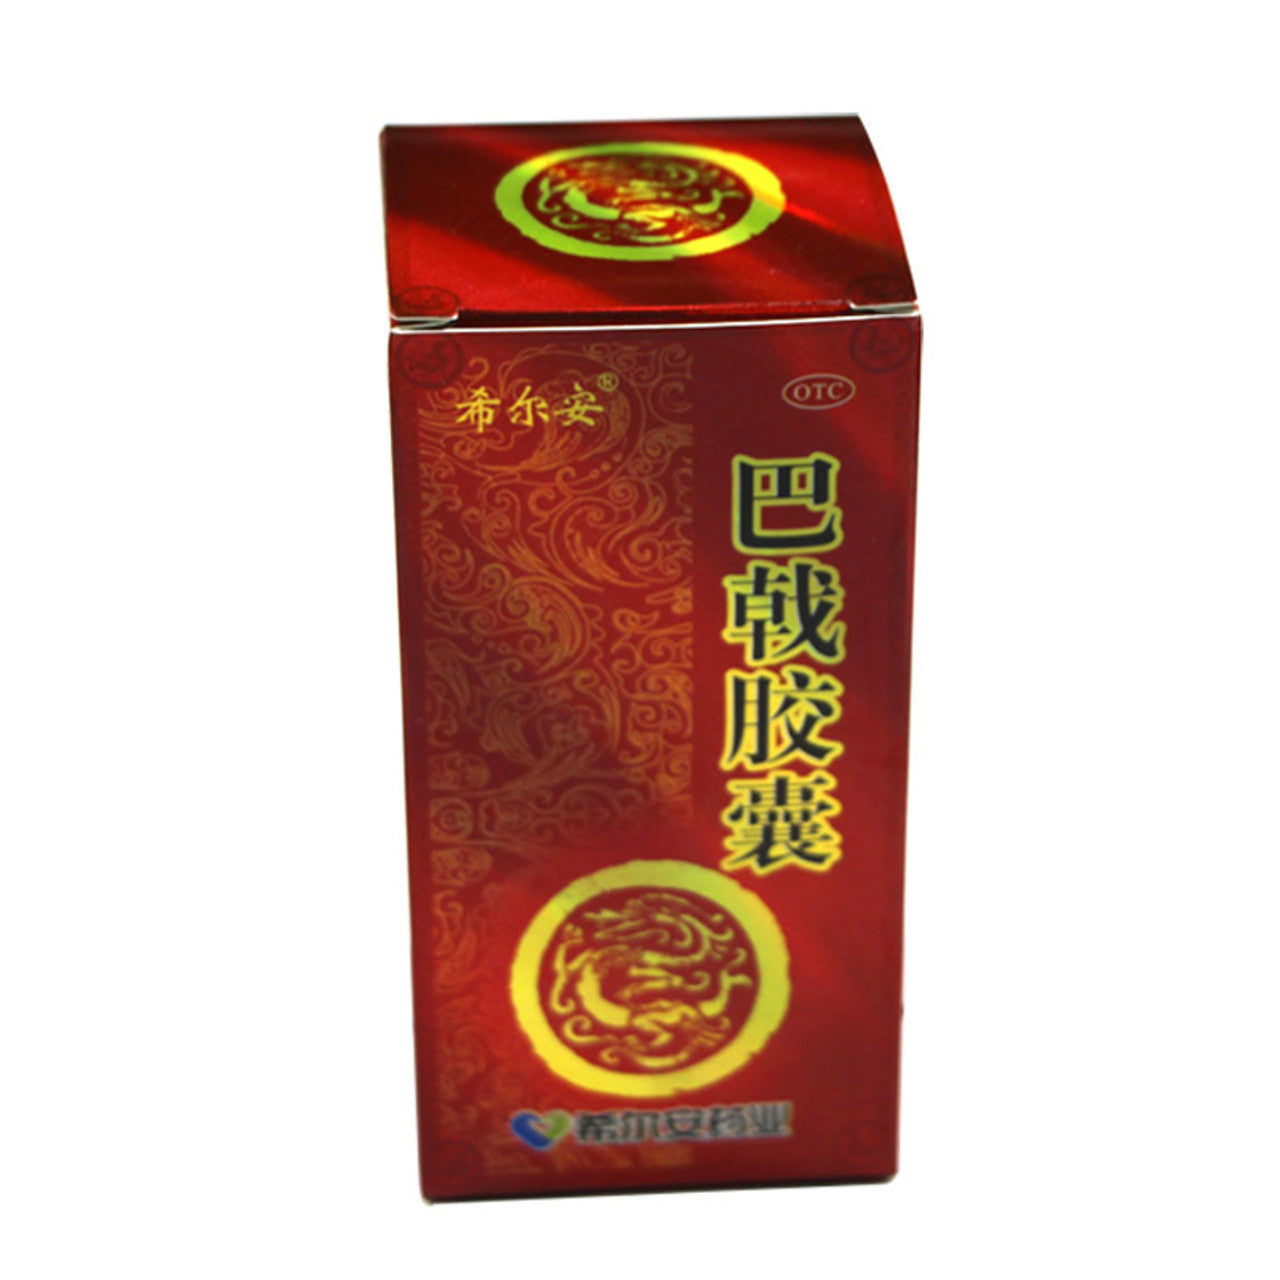 (36 capsules*5 boxes). Ba Ji Jiao Nang for fatigue caused by insufficient kidney yang, weak waist and knees, and also used for frequent nocturia and irregular menstruation.